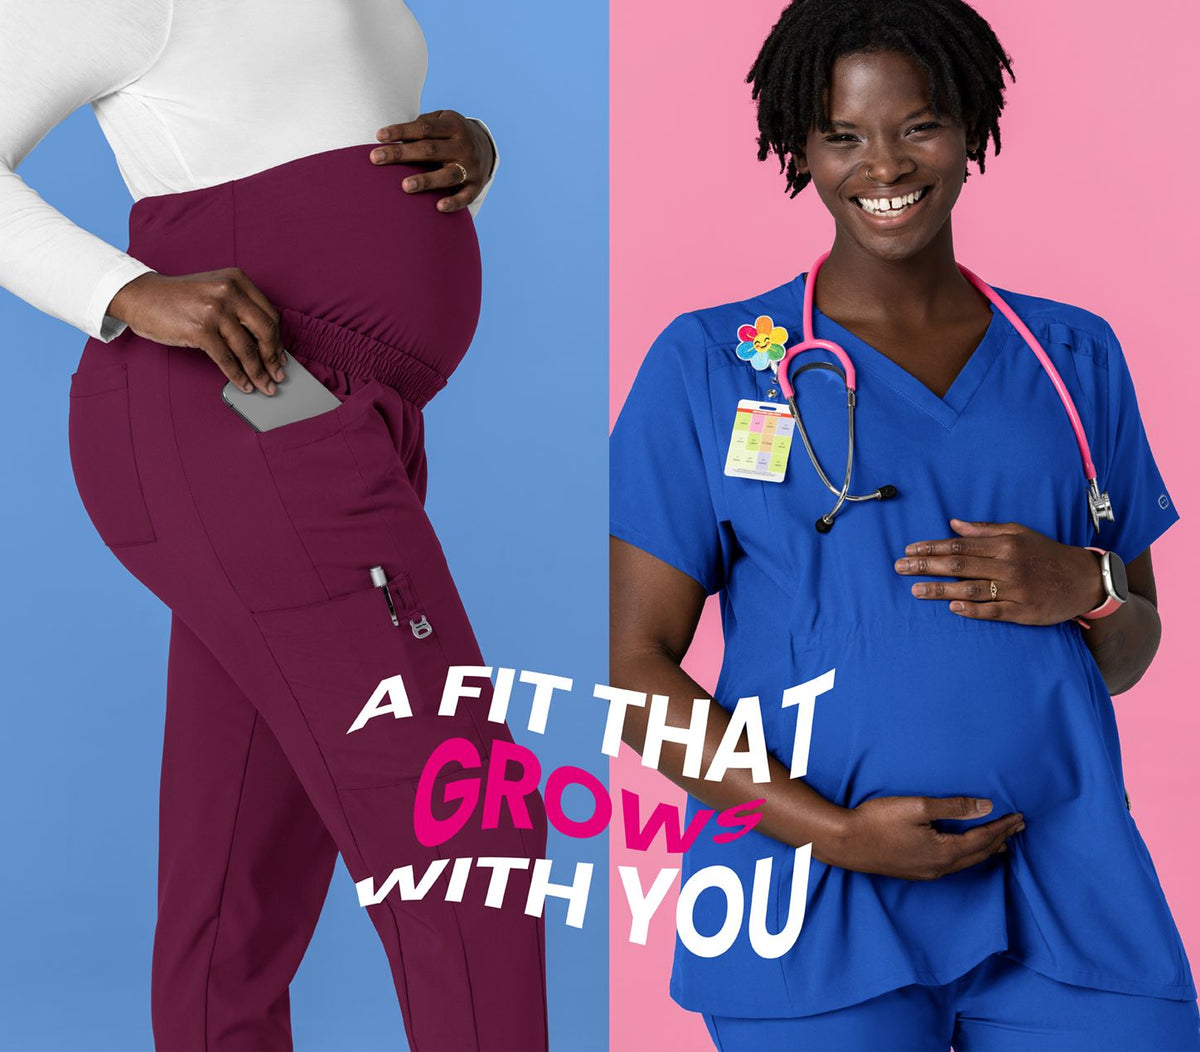 Maternity Joggers and Maternity Scrub Top. "A fit that grows with you"